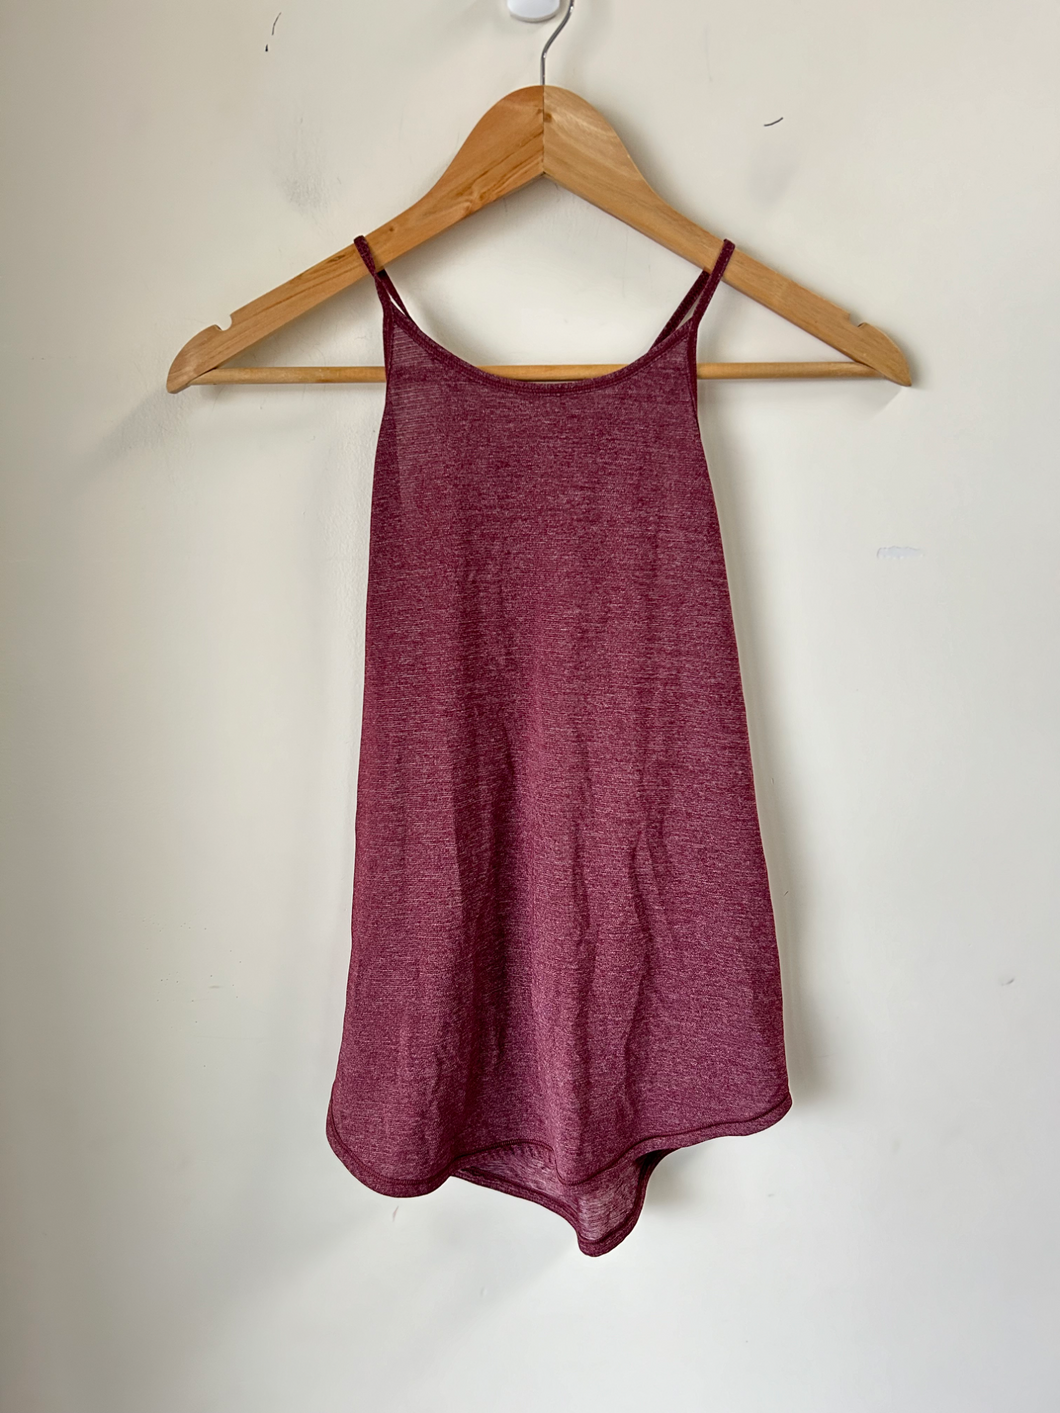 Lululemon Athletic Top Size Small